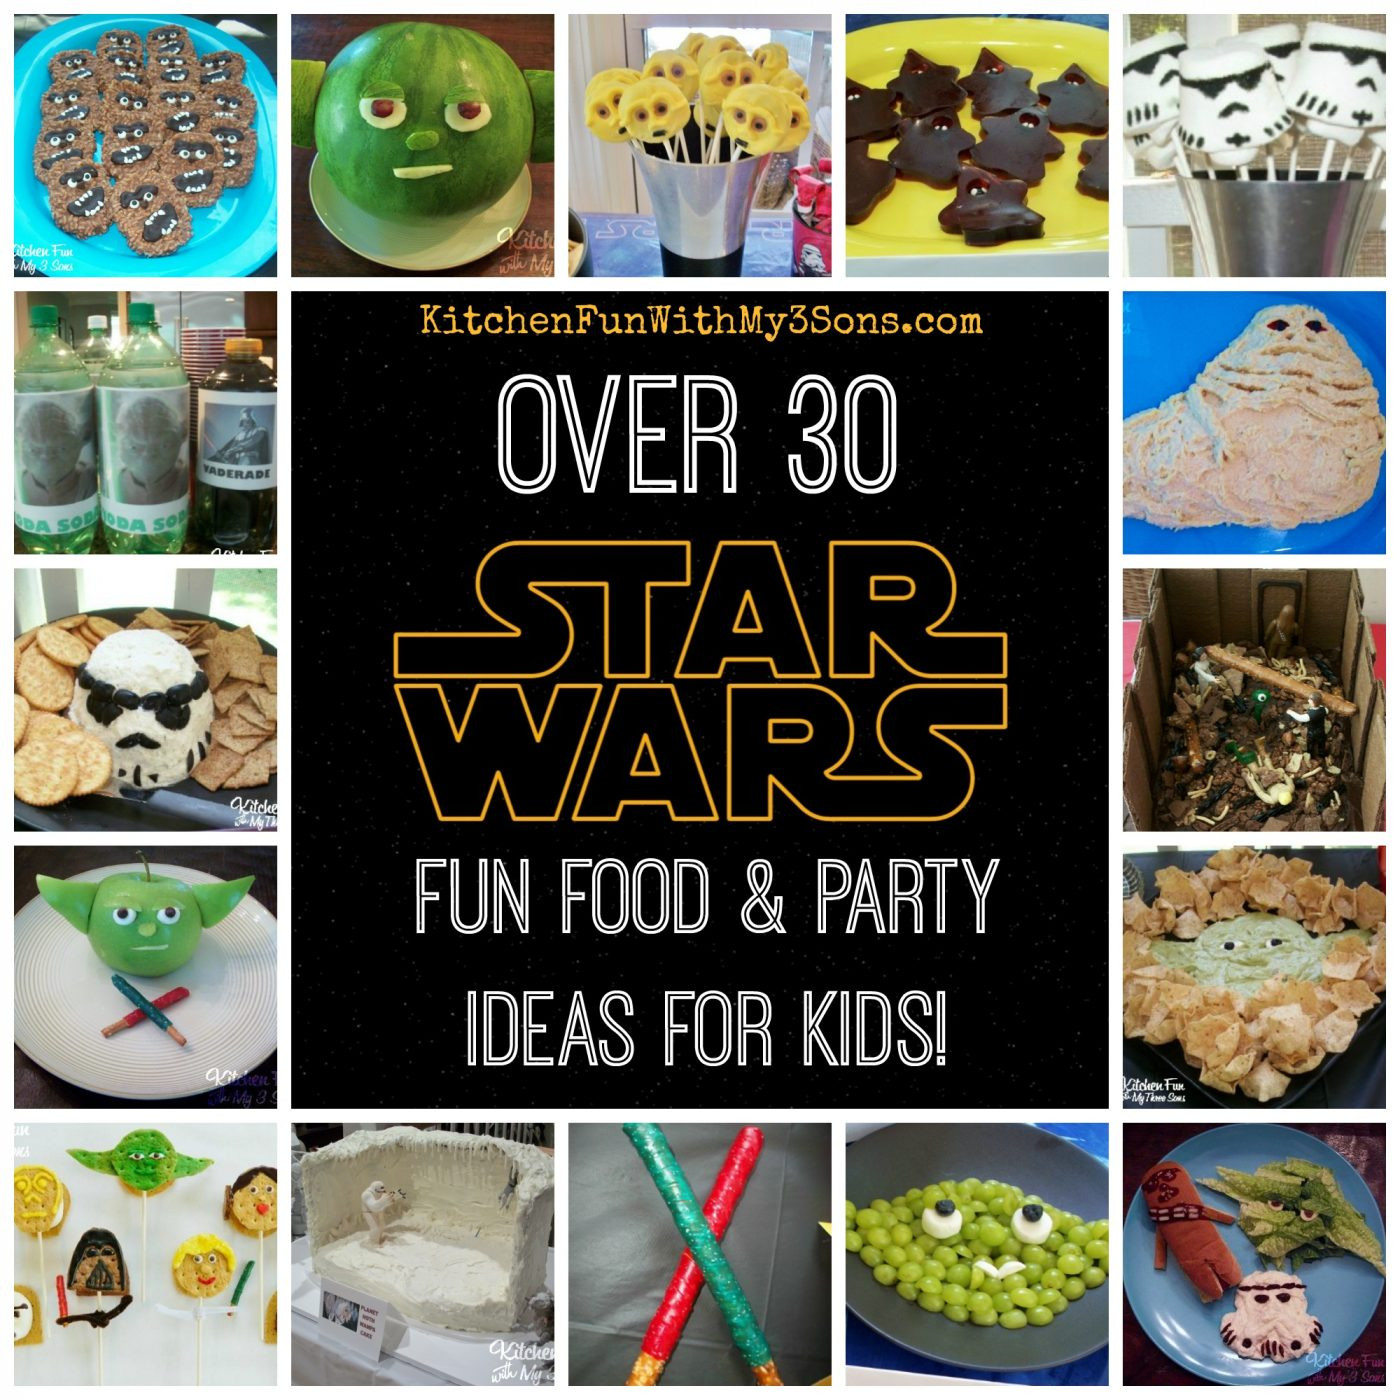 Star Wars Kids Party
 Star Wars Fun Food & Party Ideas our full collection